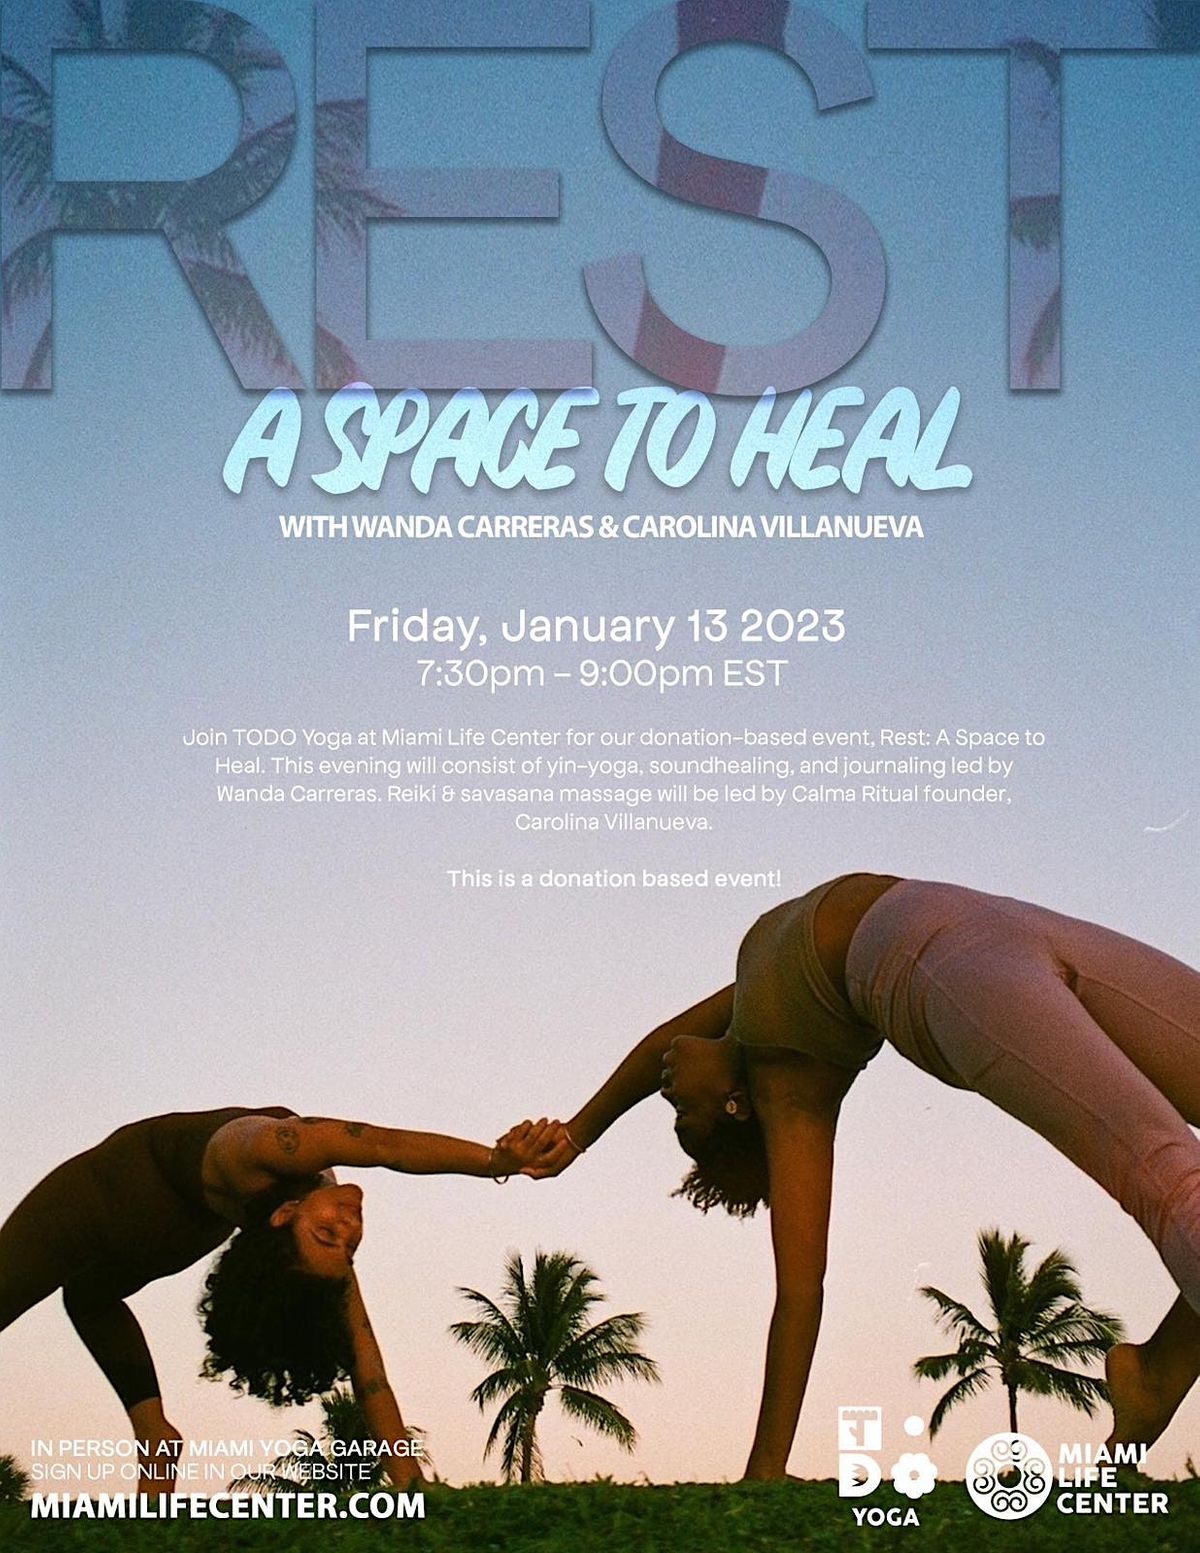 Rest: A Space to Heal